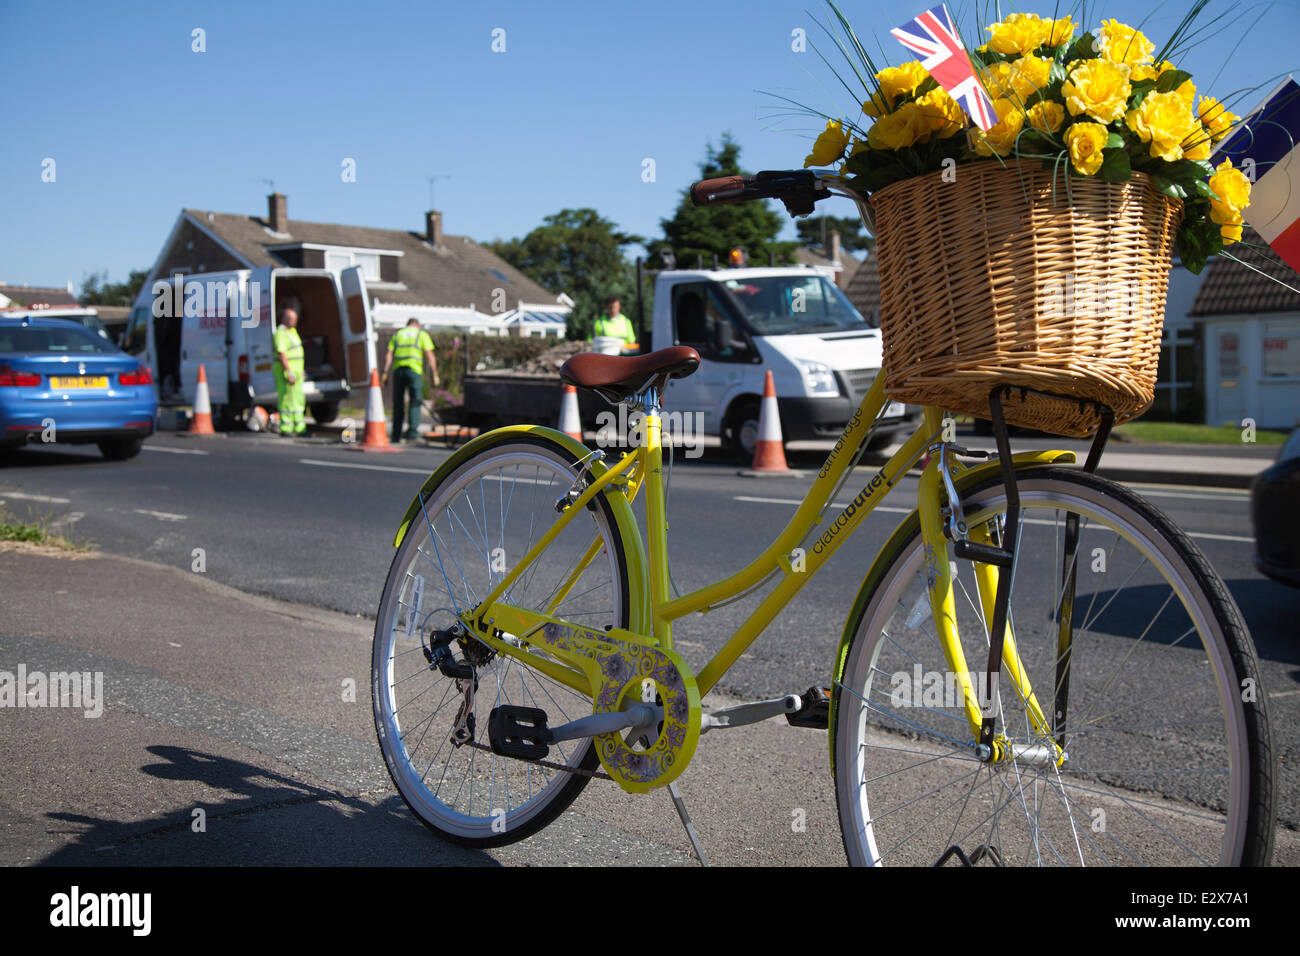 Women's floral decorated yellow bicycle in York, Yorkshire, UK. 21st June, 2014.  Maintenance crew carrying out Saturday Road repairs on the  Tour de France route.  A total of £4million has been allocated by eight Yorkshire councils to get the region’s roads repaired and the route ready for Tour de France in July.  The money is being spent to ensure that the 389 kilometres of tarmac to be used for the 2014 Tour’s Grand Depart, will be pothole free. The route is now being lined with yellow flowers, baskets, bunting and bikes. Stock Photo